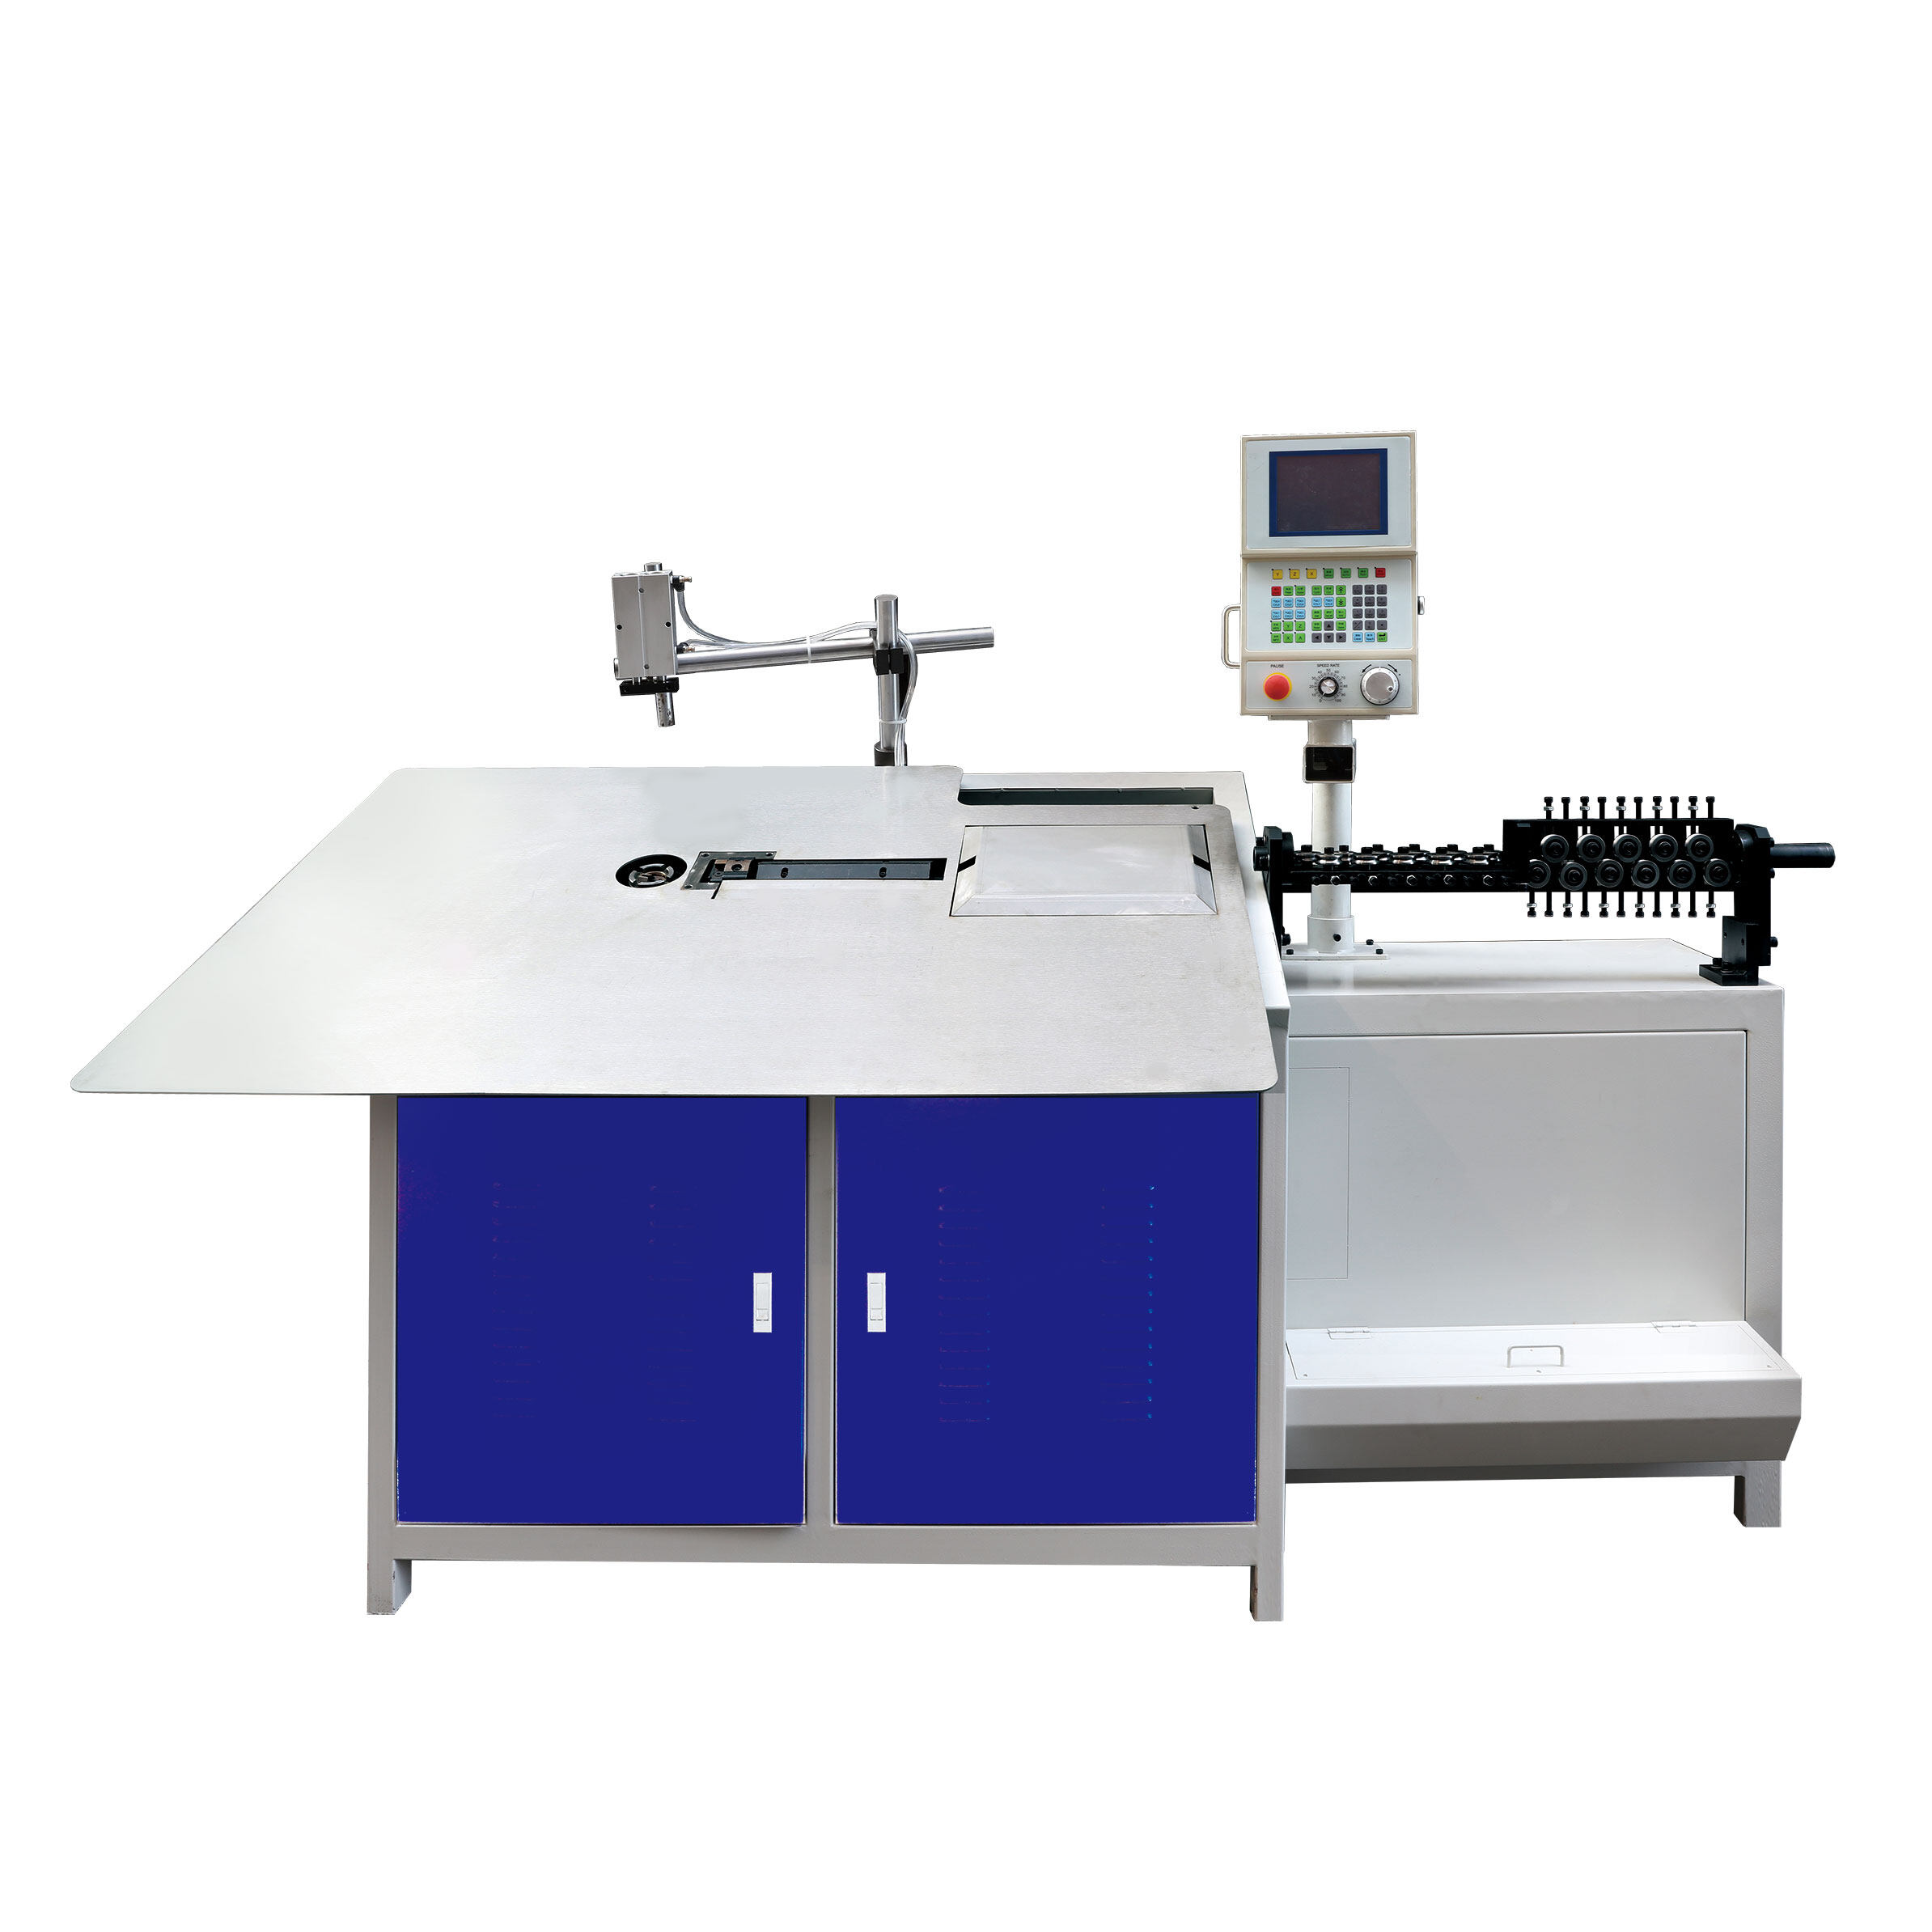 automated wire bending machine,bending wire machine factory,cnc wire bending machine manufacturer